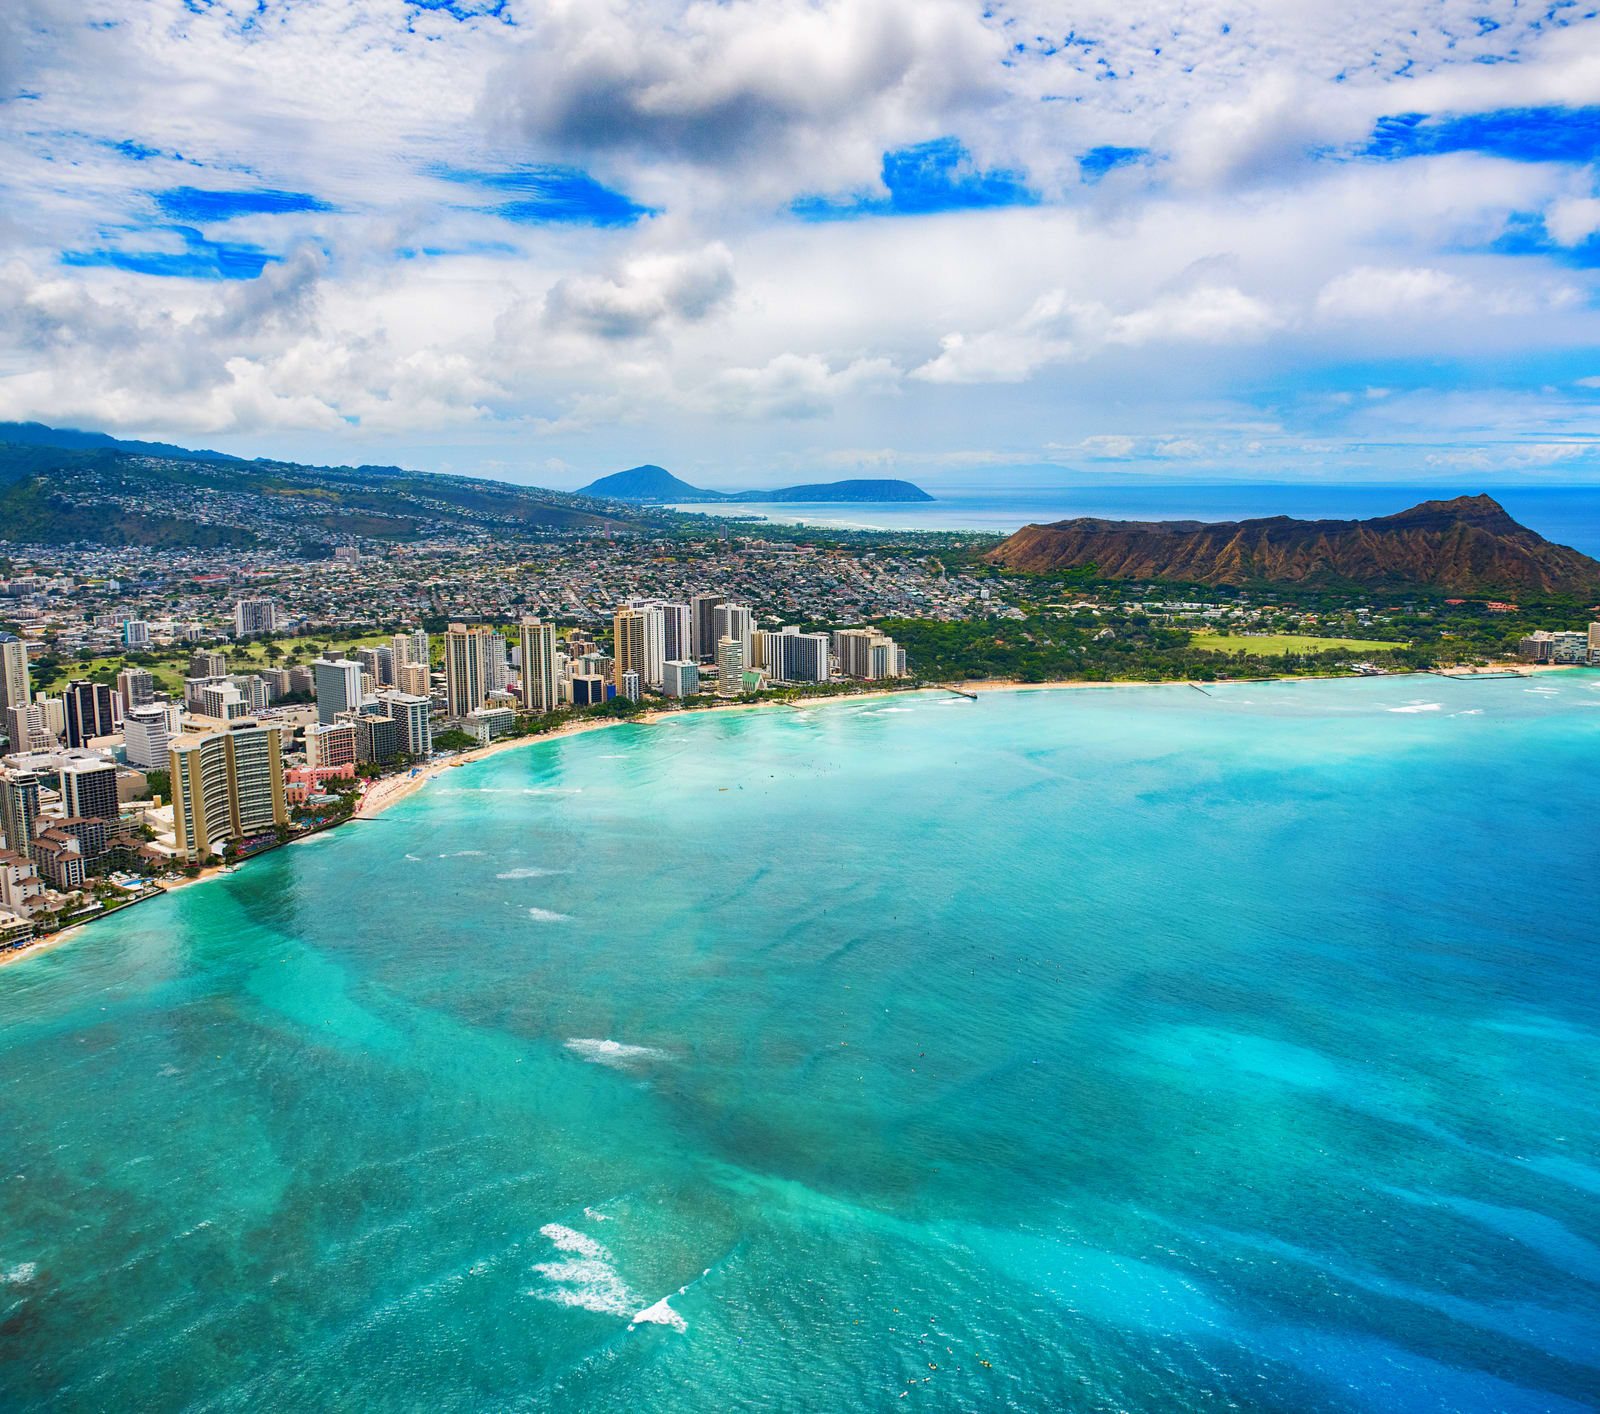 How Much Does It Cost To Fly To Hawaii? - Valuepenguin